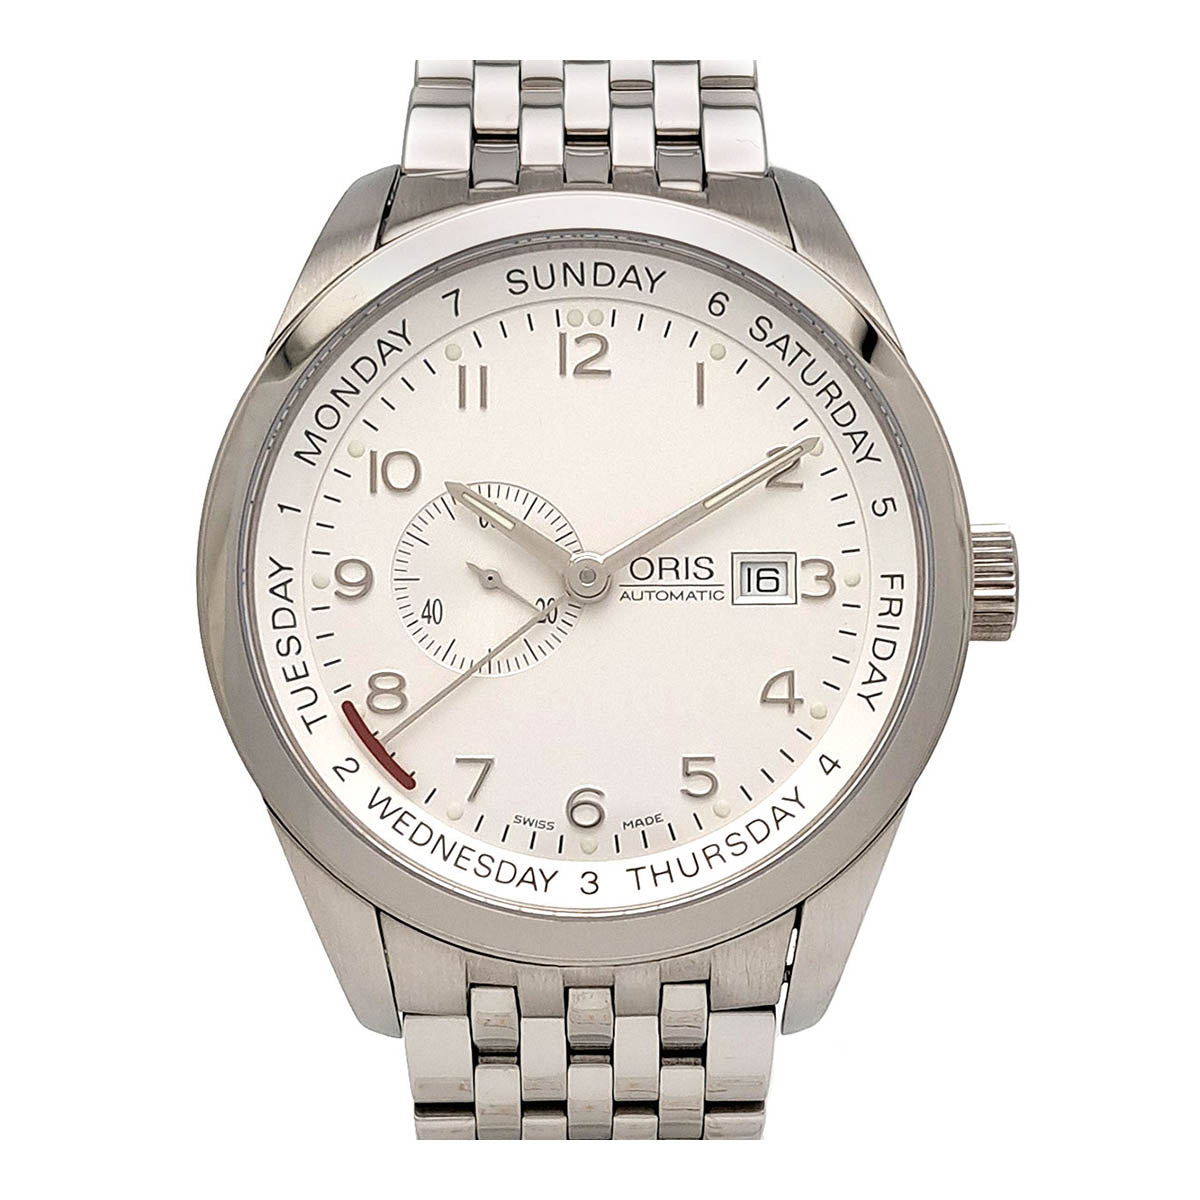 Oris Pointer Date 7529 Automatic Watch, Stainless Steel, Men's (Pre-owned) 7529.0